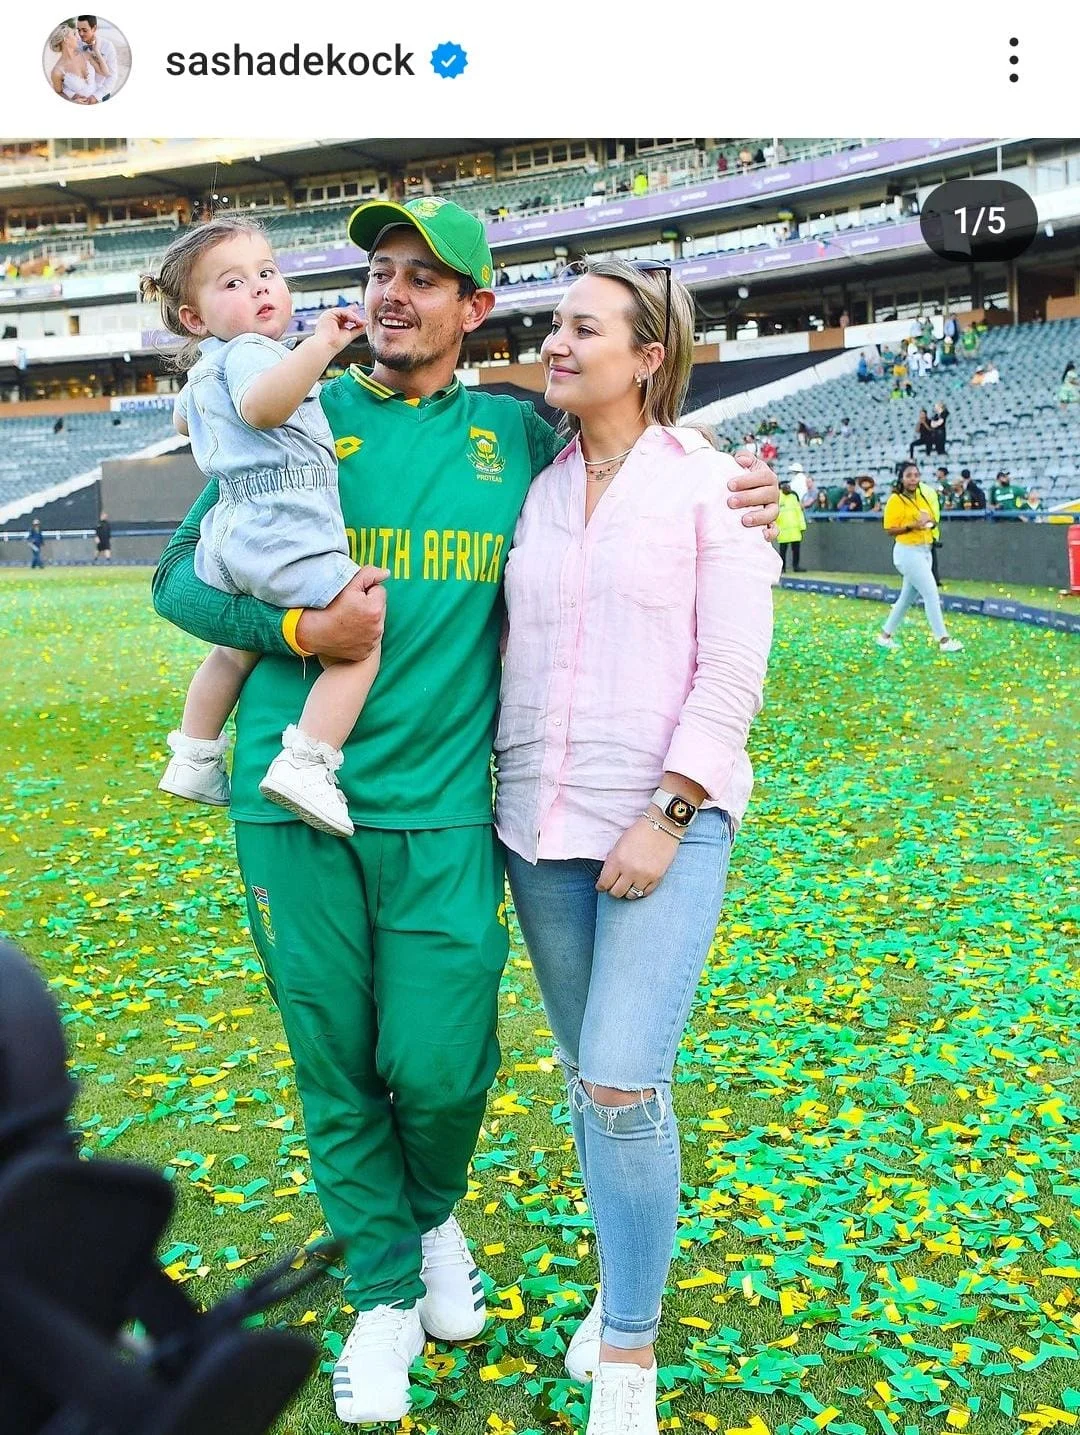 Meet Quinton de Kock’s Wife Who Looks Like A Hollywood Actress